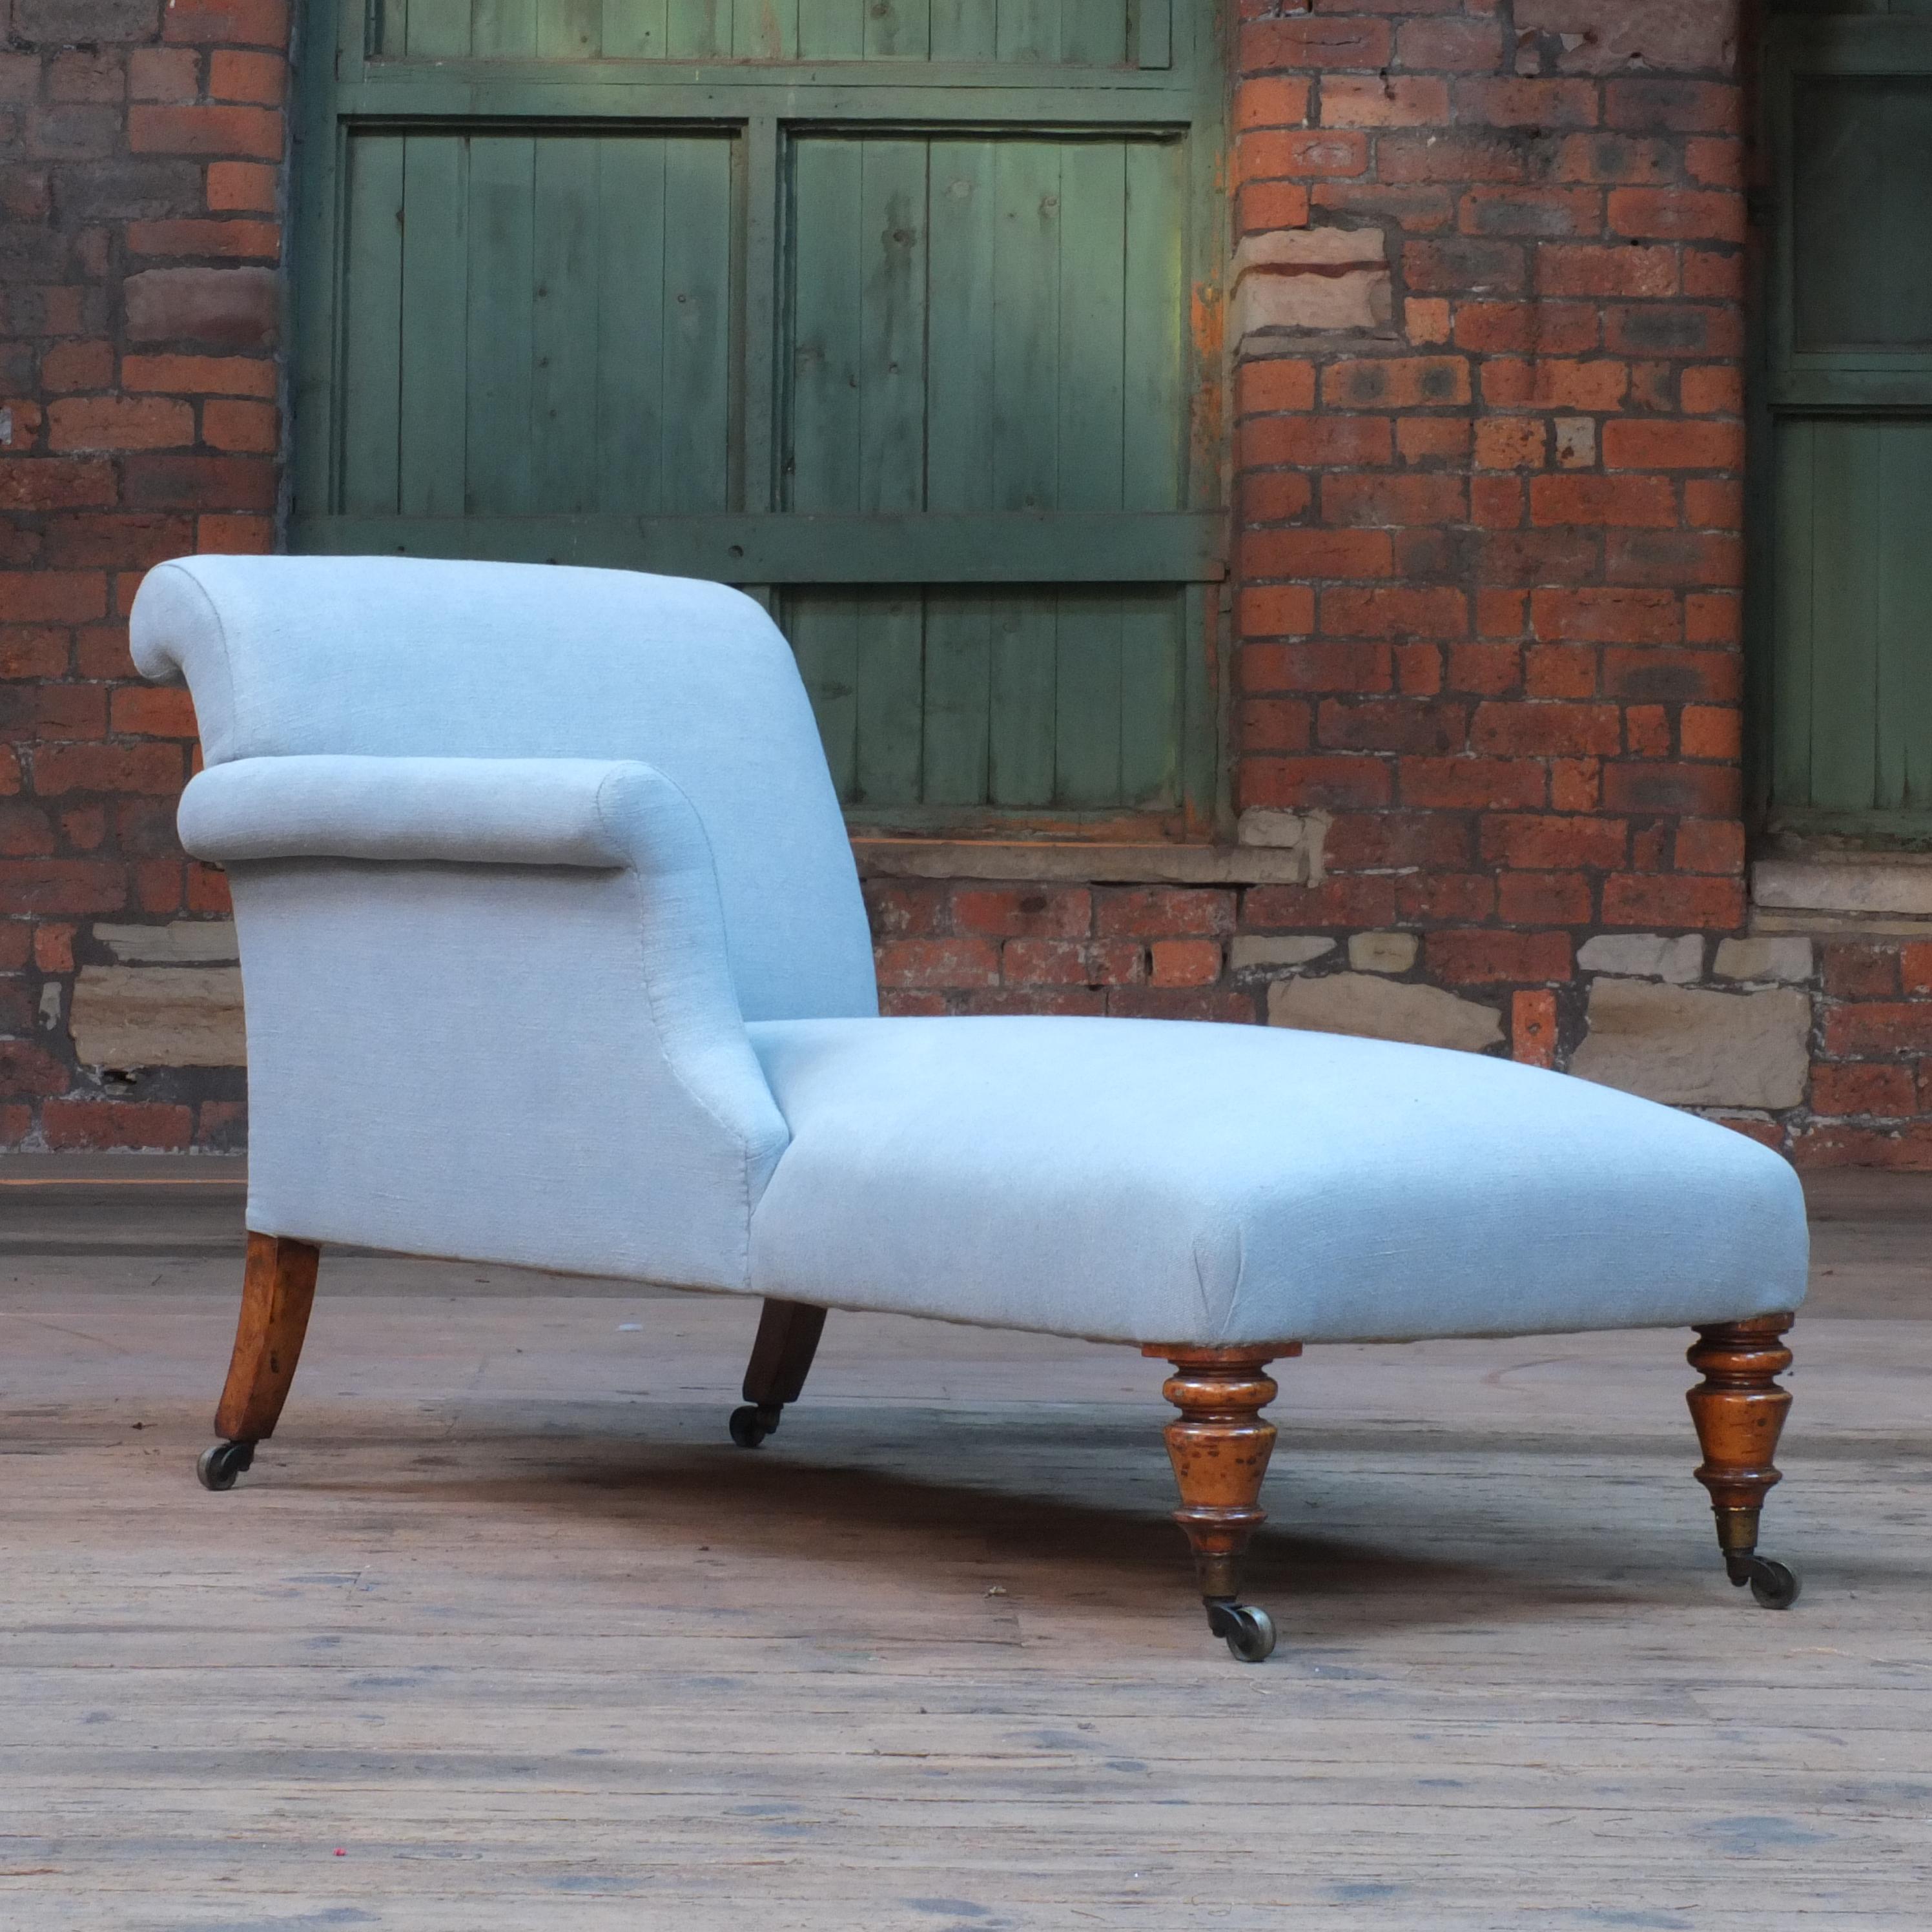 Mahogany Early 19th Century Chaise Lounge by Charles Hindley & Sons